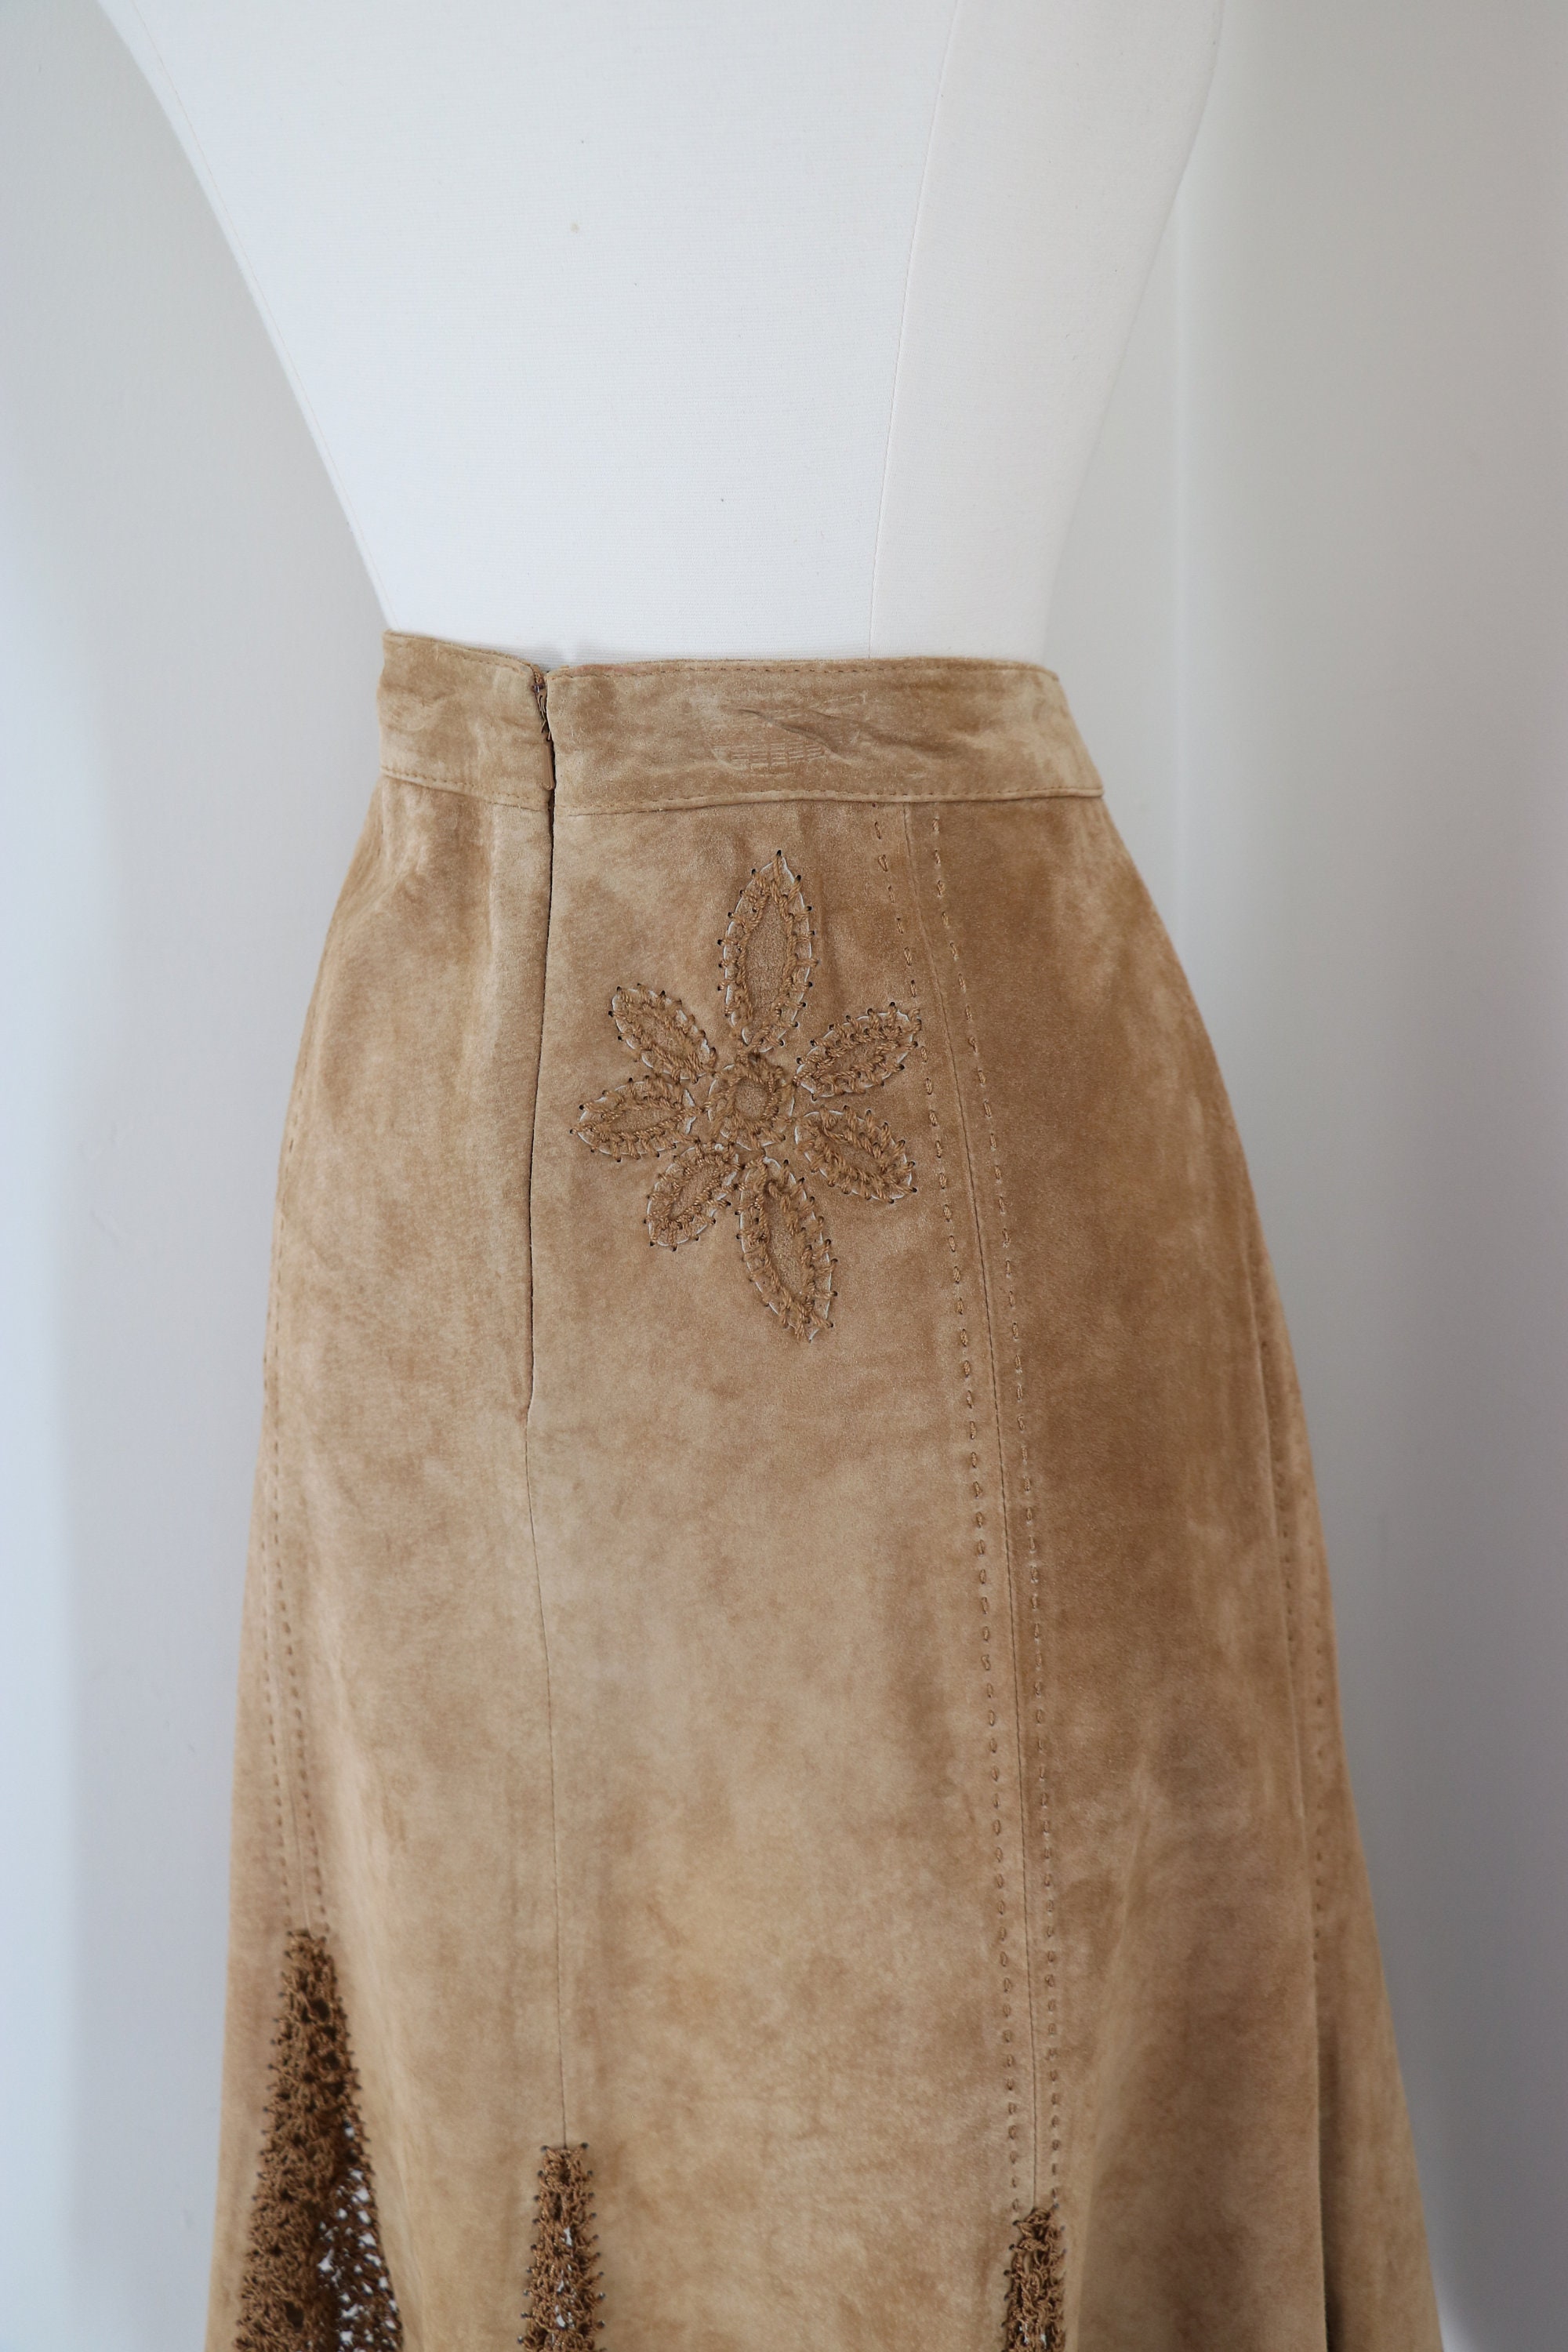 Vintage 90s Does 70s Boho Suede Crochet Skirt Leather - Etsy